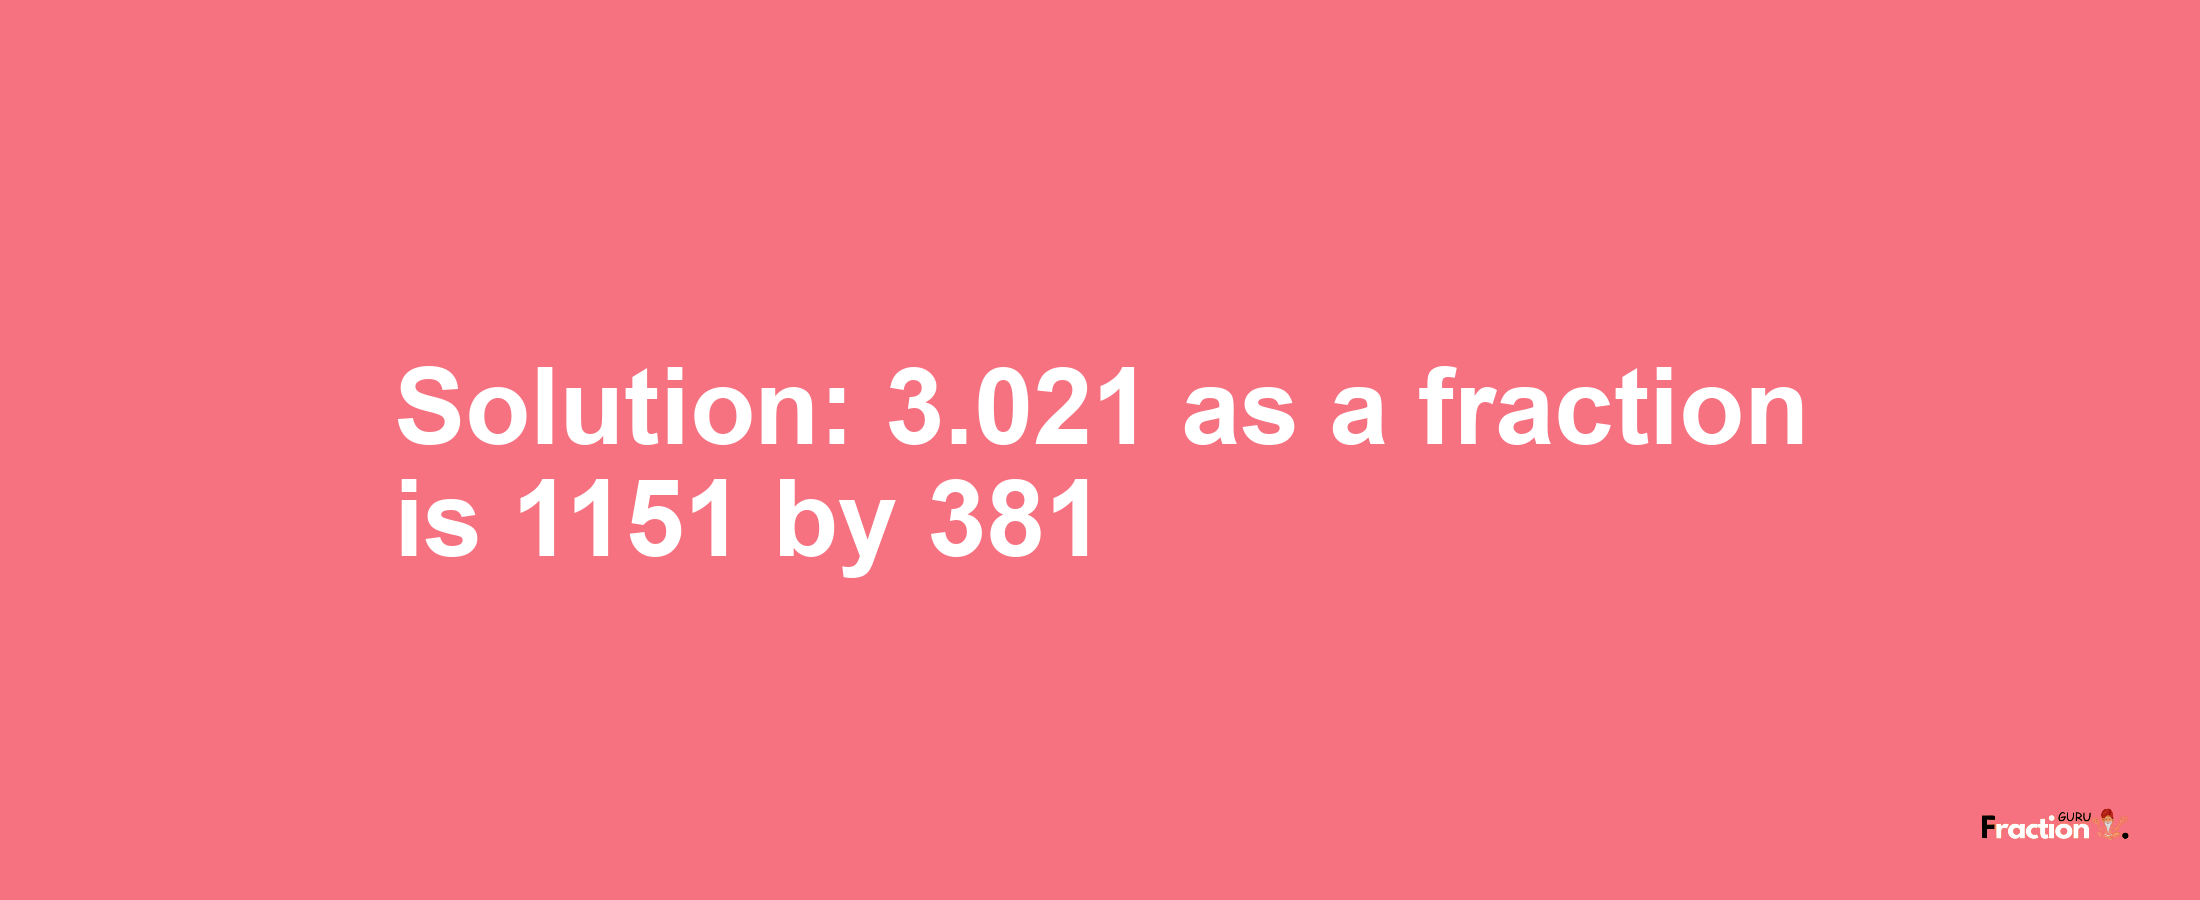 Solution:3.021 as a fraction is 1151/381